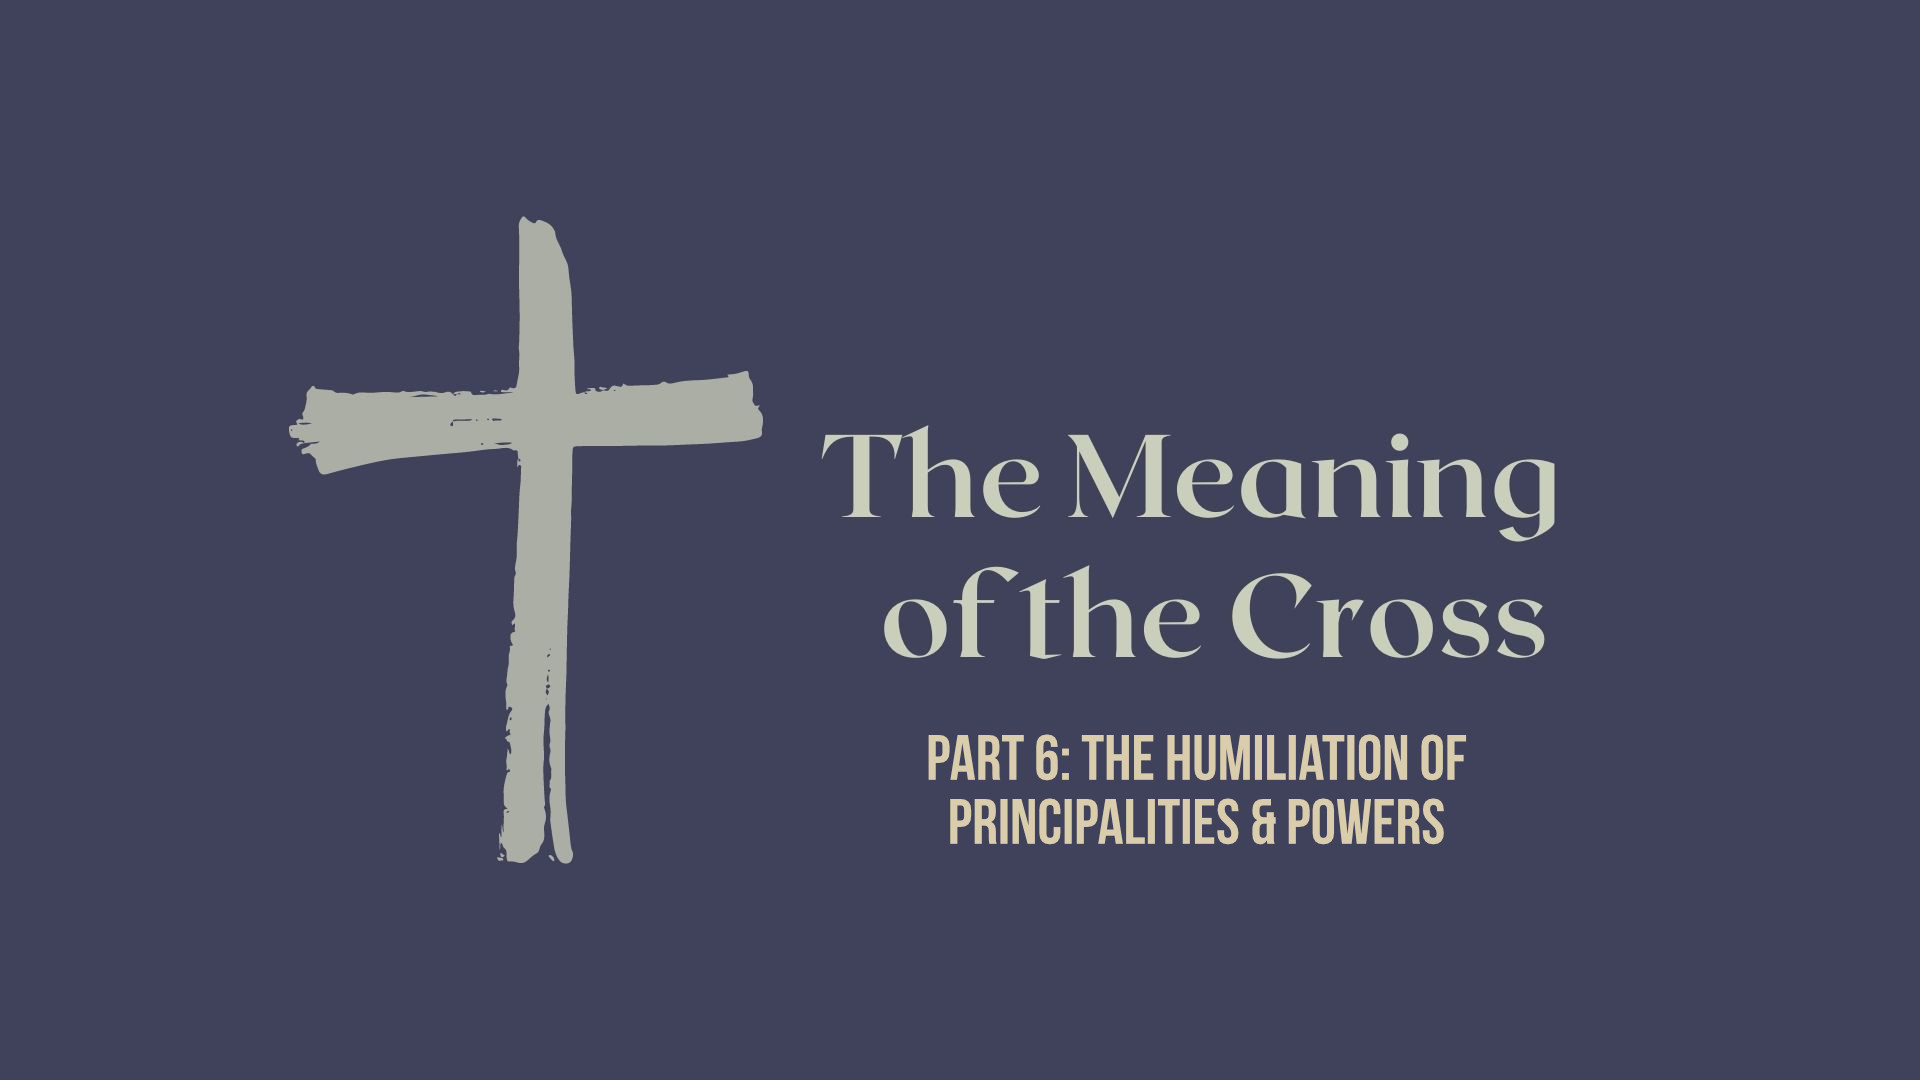 The Meaning of the Cross: The Humiliation of Principalities & Powers ...